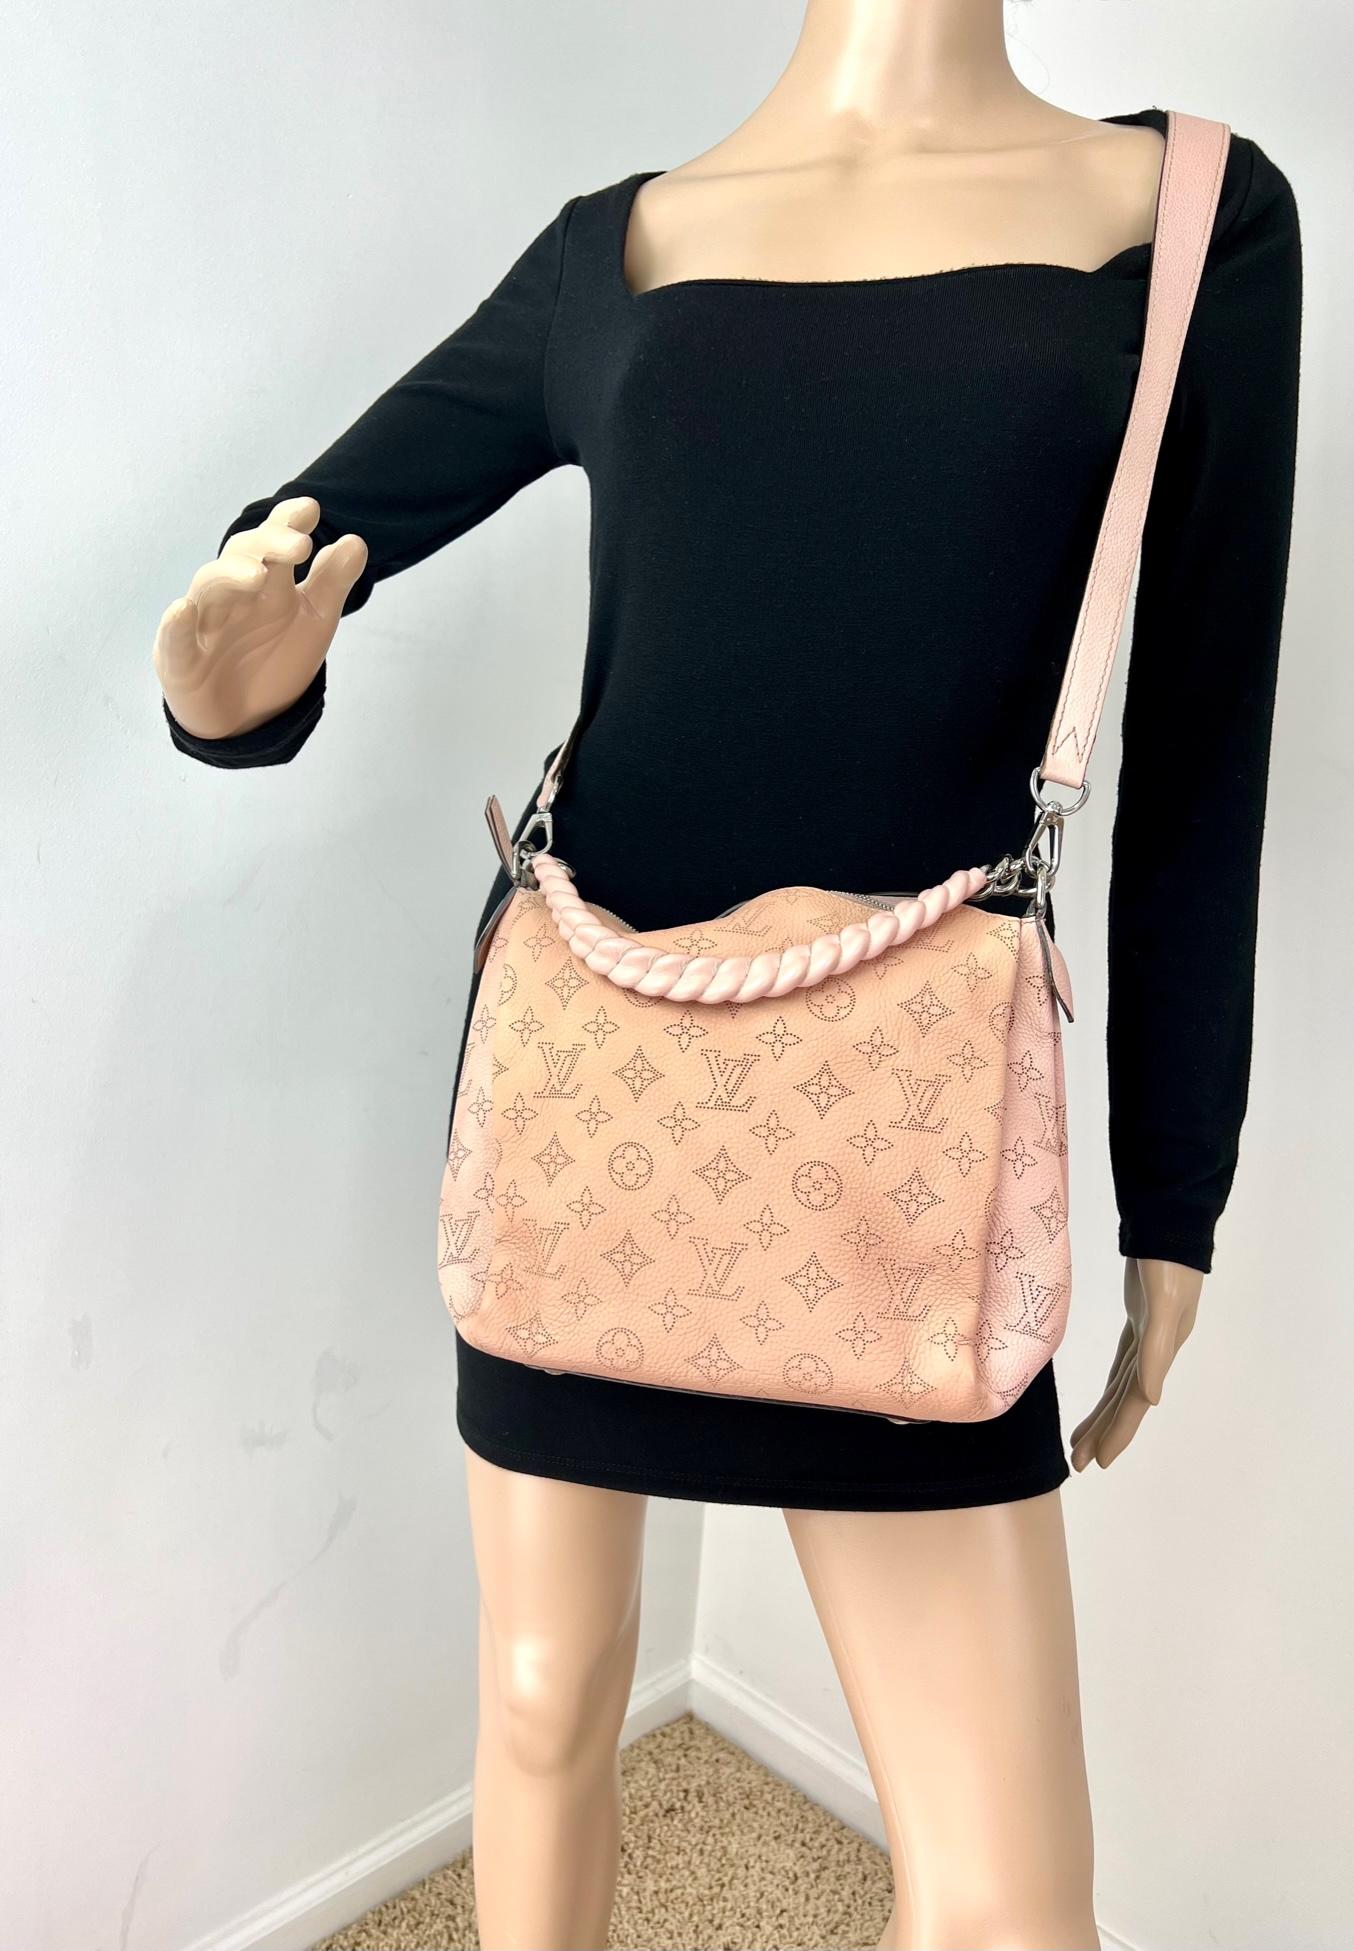 Pre-Owned  100% Authentic
LOUIS VUITTON Babylone Chain BB Mahina
Magnolia Shoulder Bag W/Silver Hardware
RATING: B...Very Good, well maintained,
shows minor signs of wear
MATERIAL: perforated Monogram Mahina Leather
STRAP: LV Removable Pink Leather